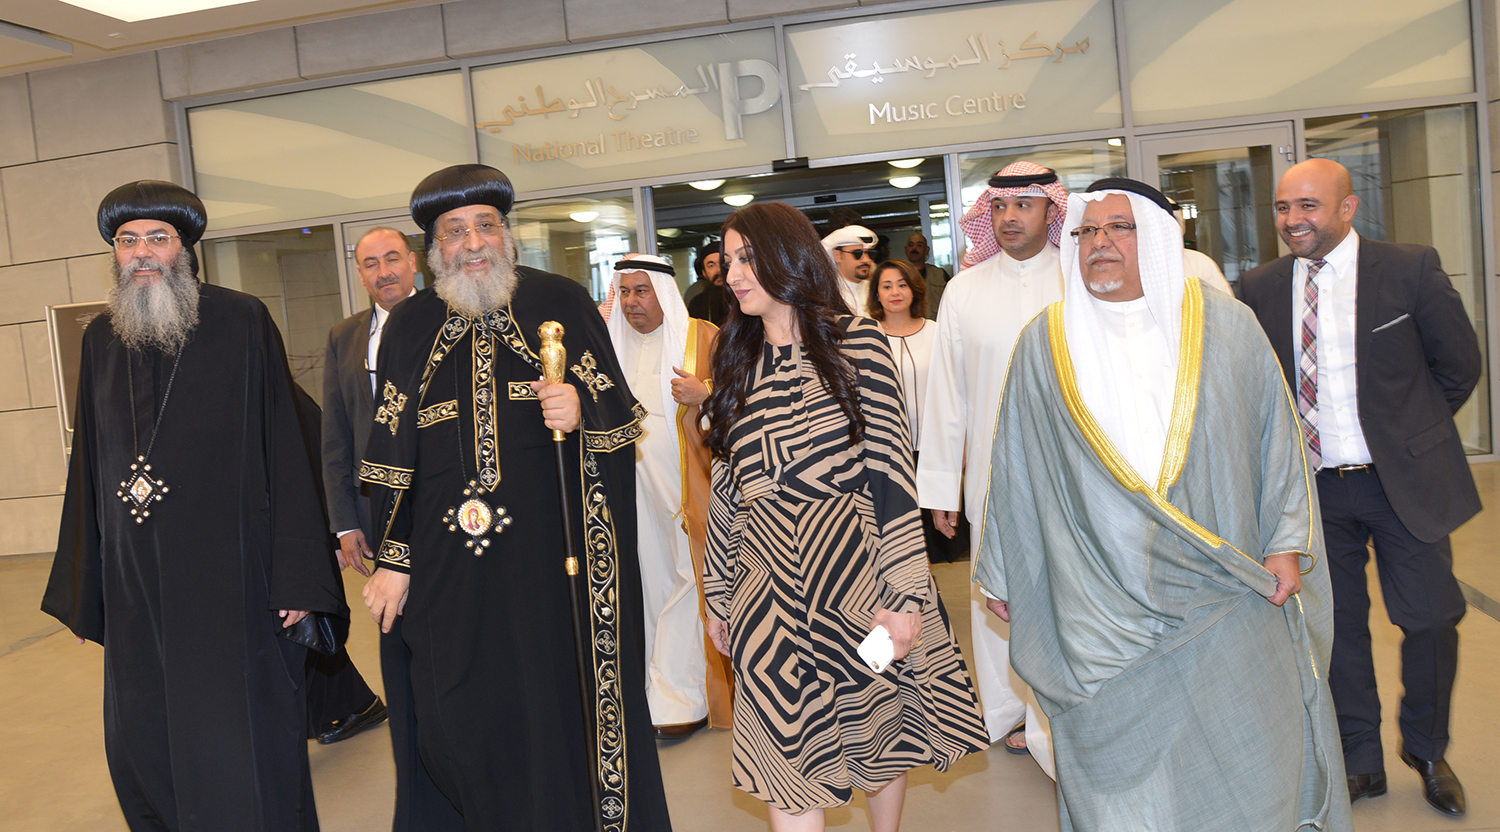 Tawadros II, the visiting Pope of Alexandria and Patriarch of the See of St. Mark, visits Sheikh Jaber Al-Ahmad Cultural Center